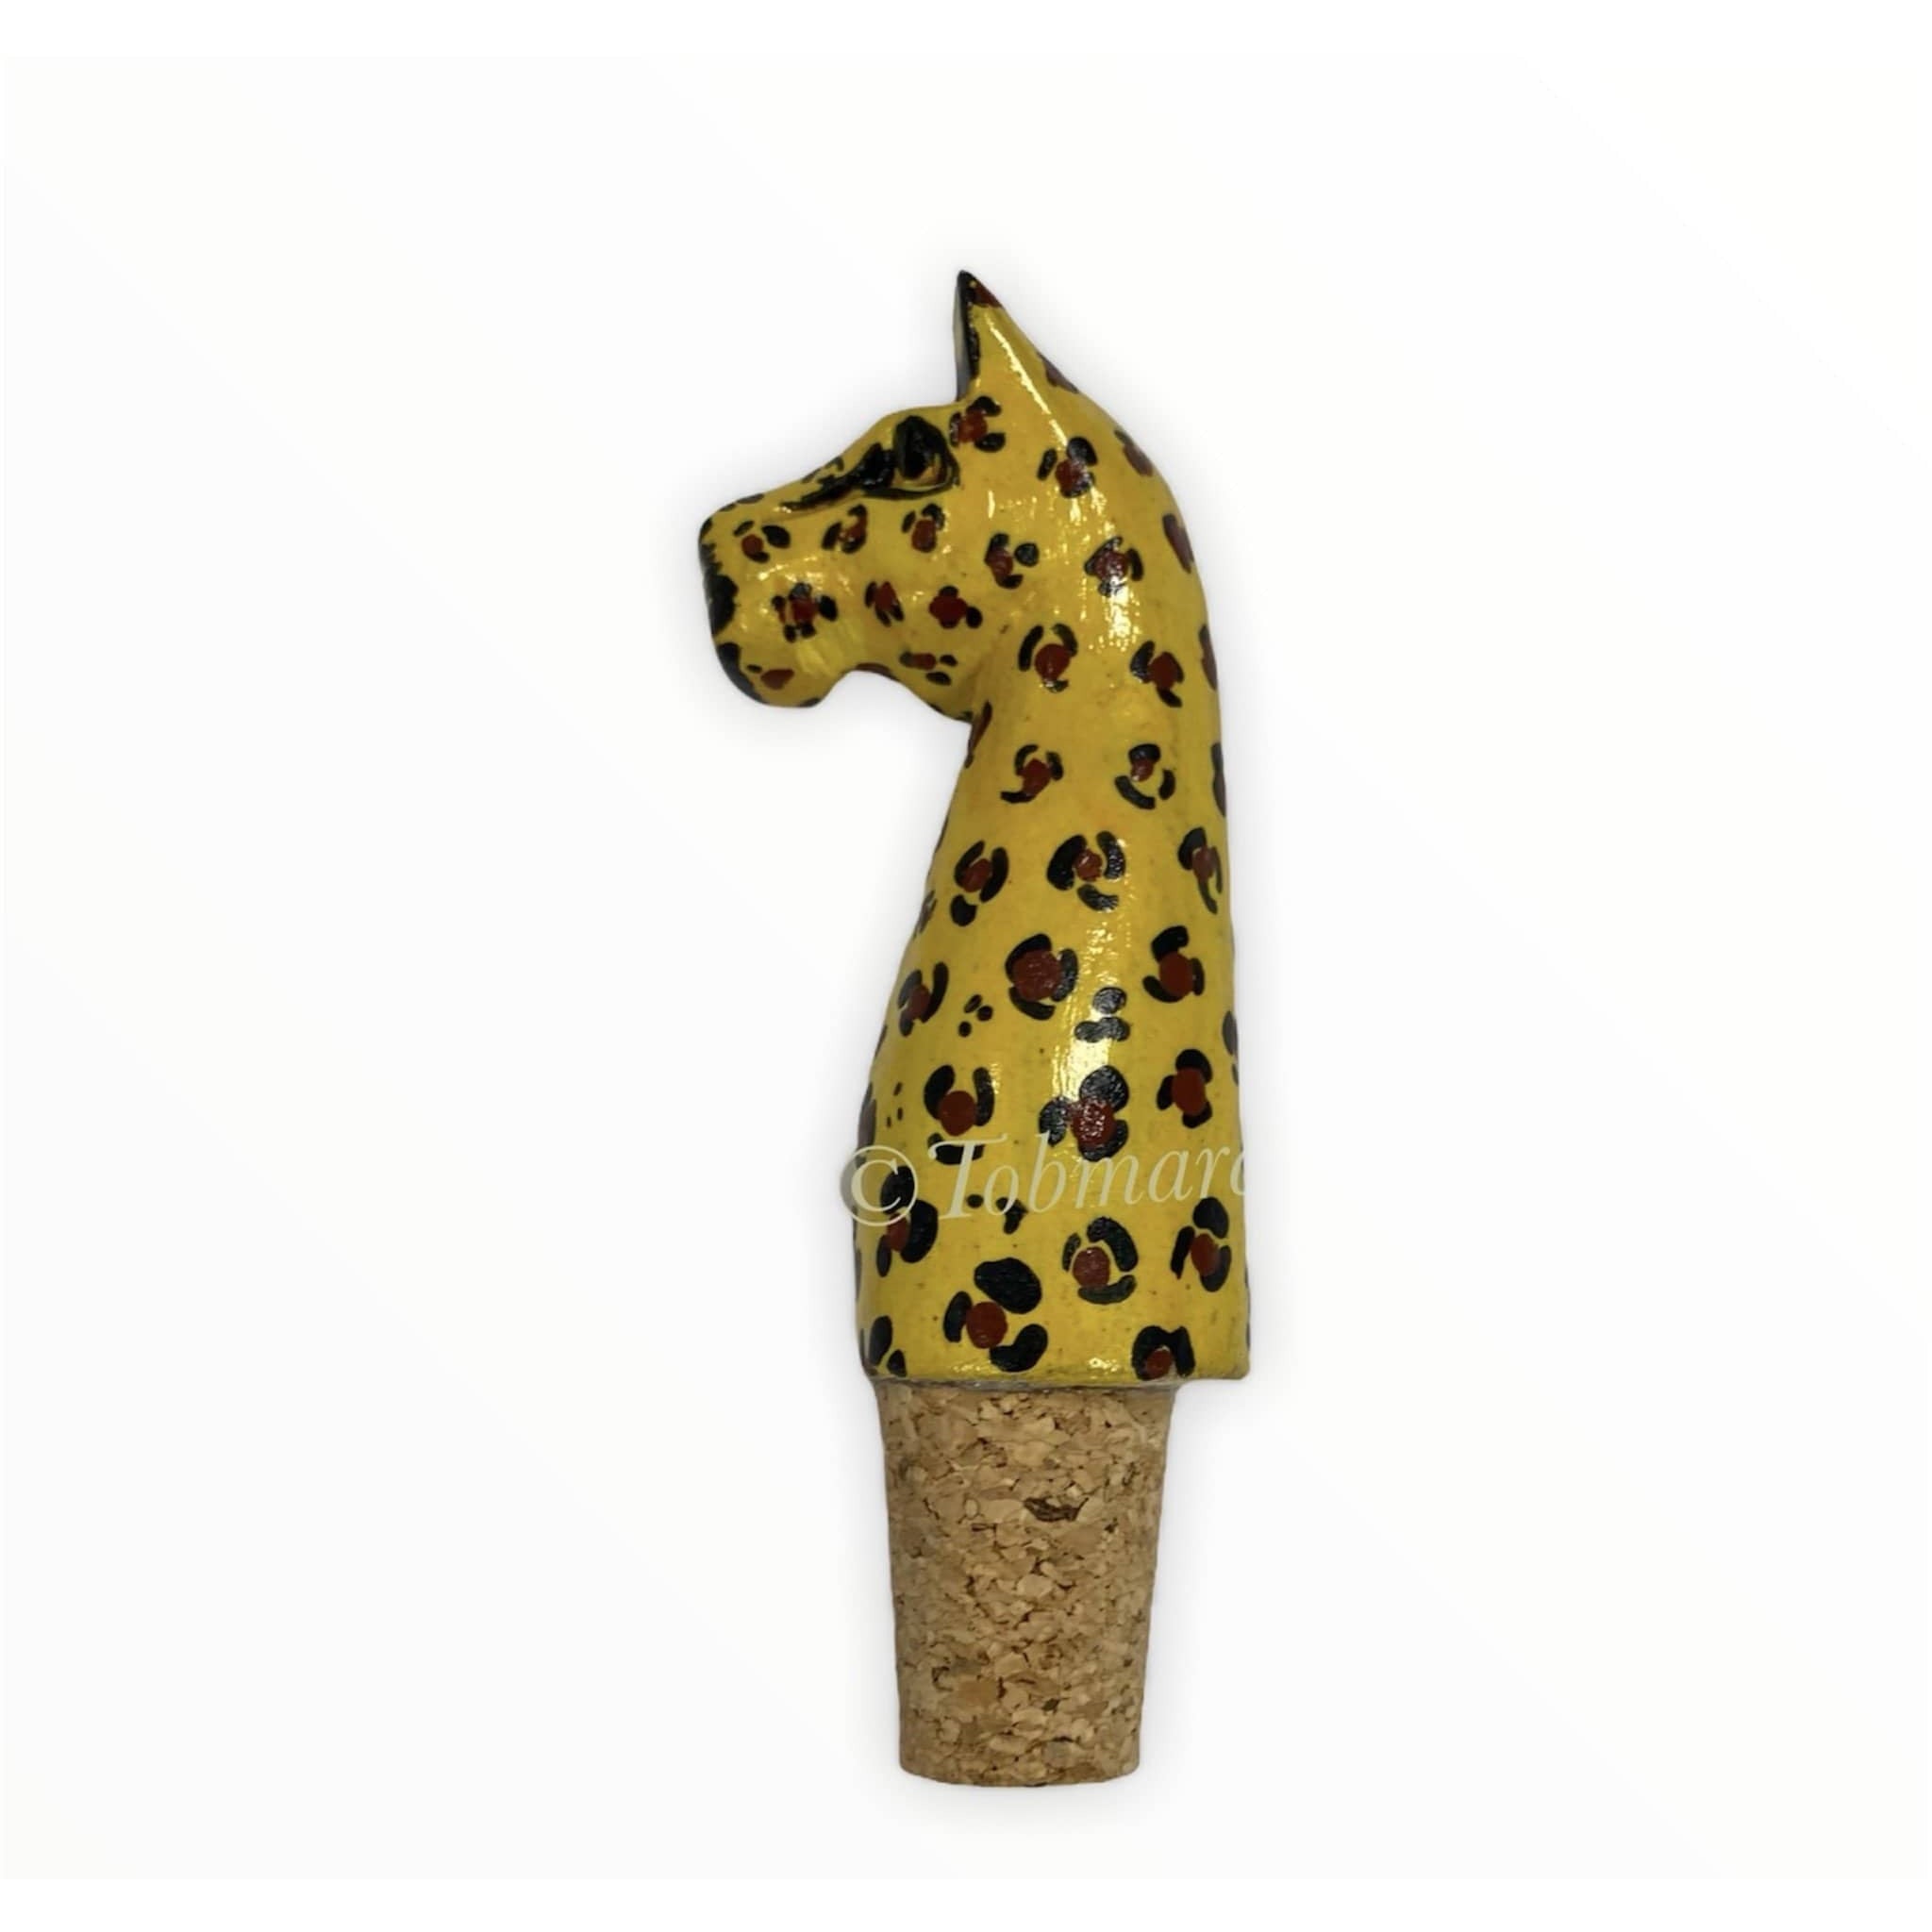 Tobmarc Home Decor & Gifts  Leopard Wine Bottle stoppers with Animal Designs, Decorative Wooden Beverage Stopper